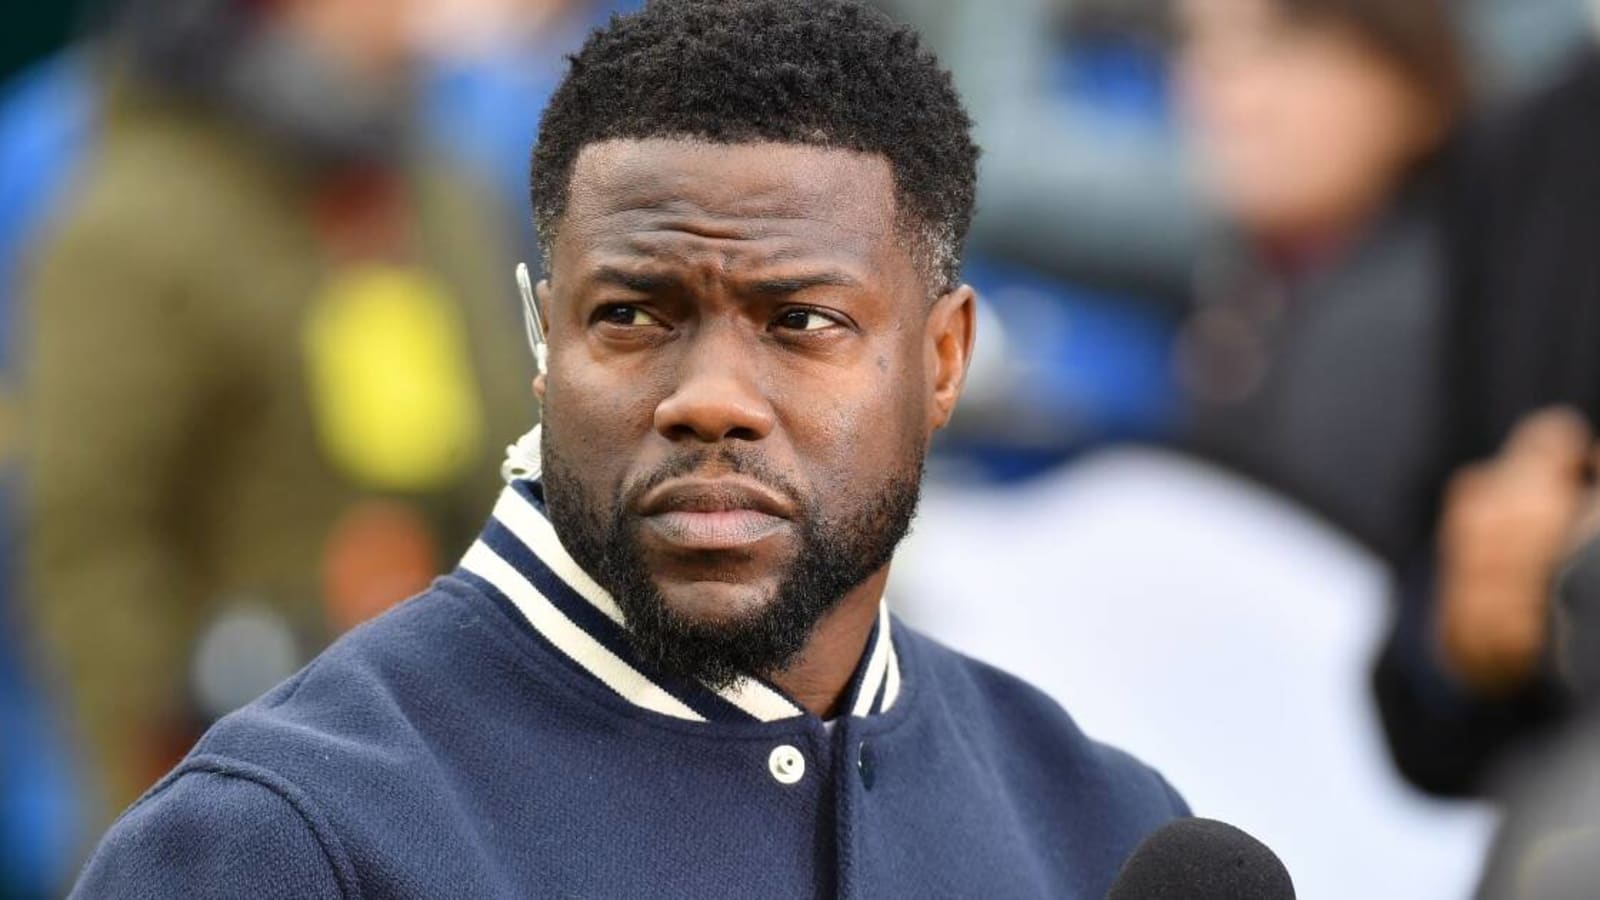 Former Patriots RB Stevan Ridley posts footage of race against Kevin Hart, roasts him